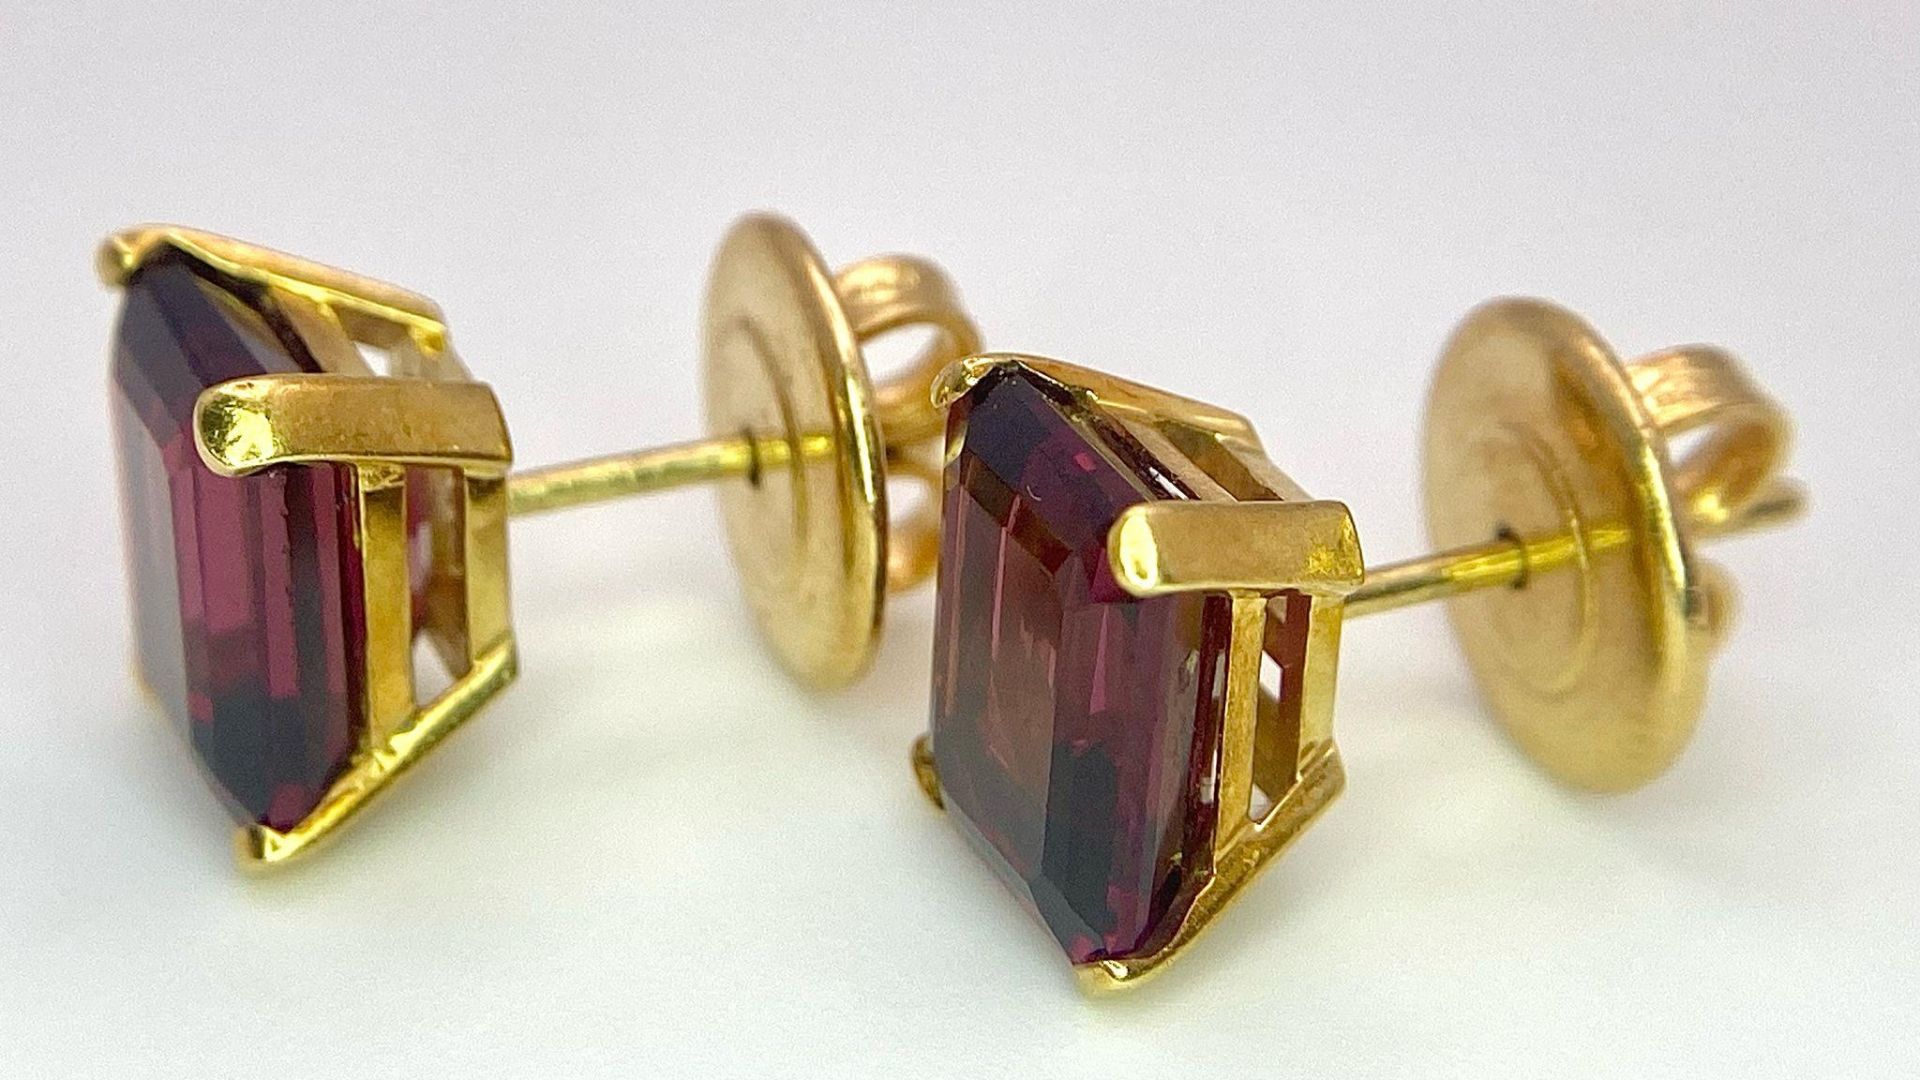 A Pair of 18K Yellow Gold and Alexandrite Earrings. Emerald cut alexandrite - 5ctw. 5.7g total - Image 6 of 8